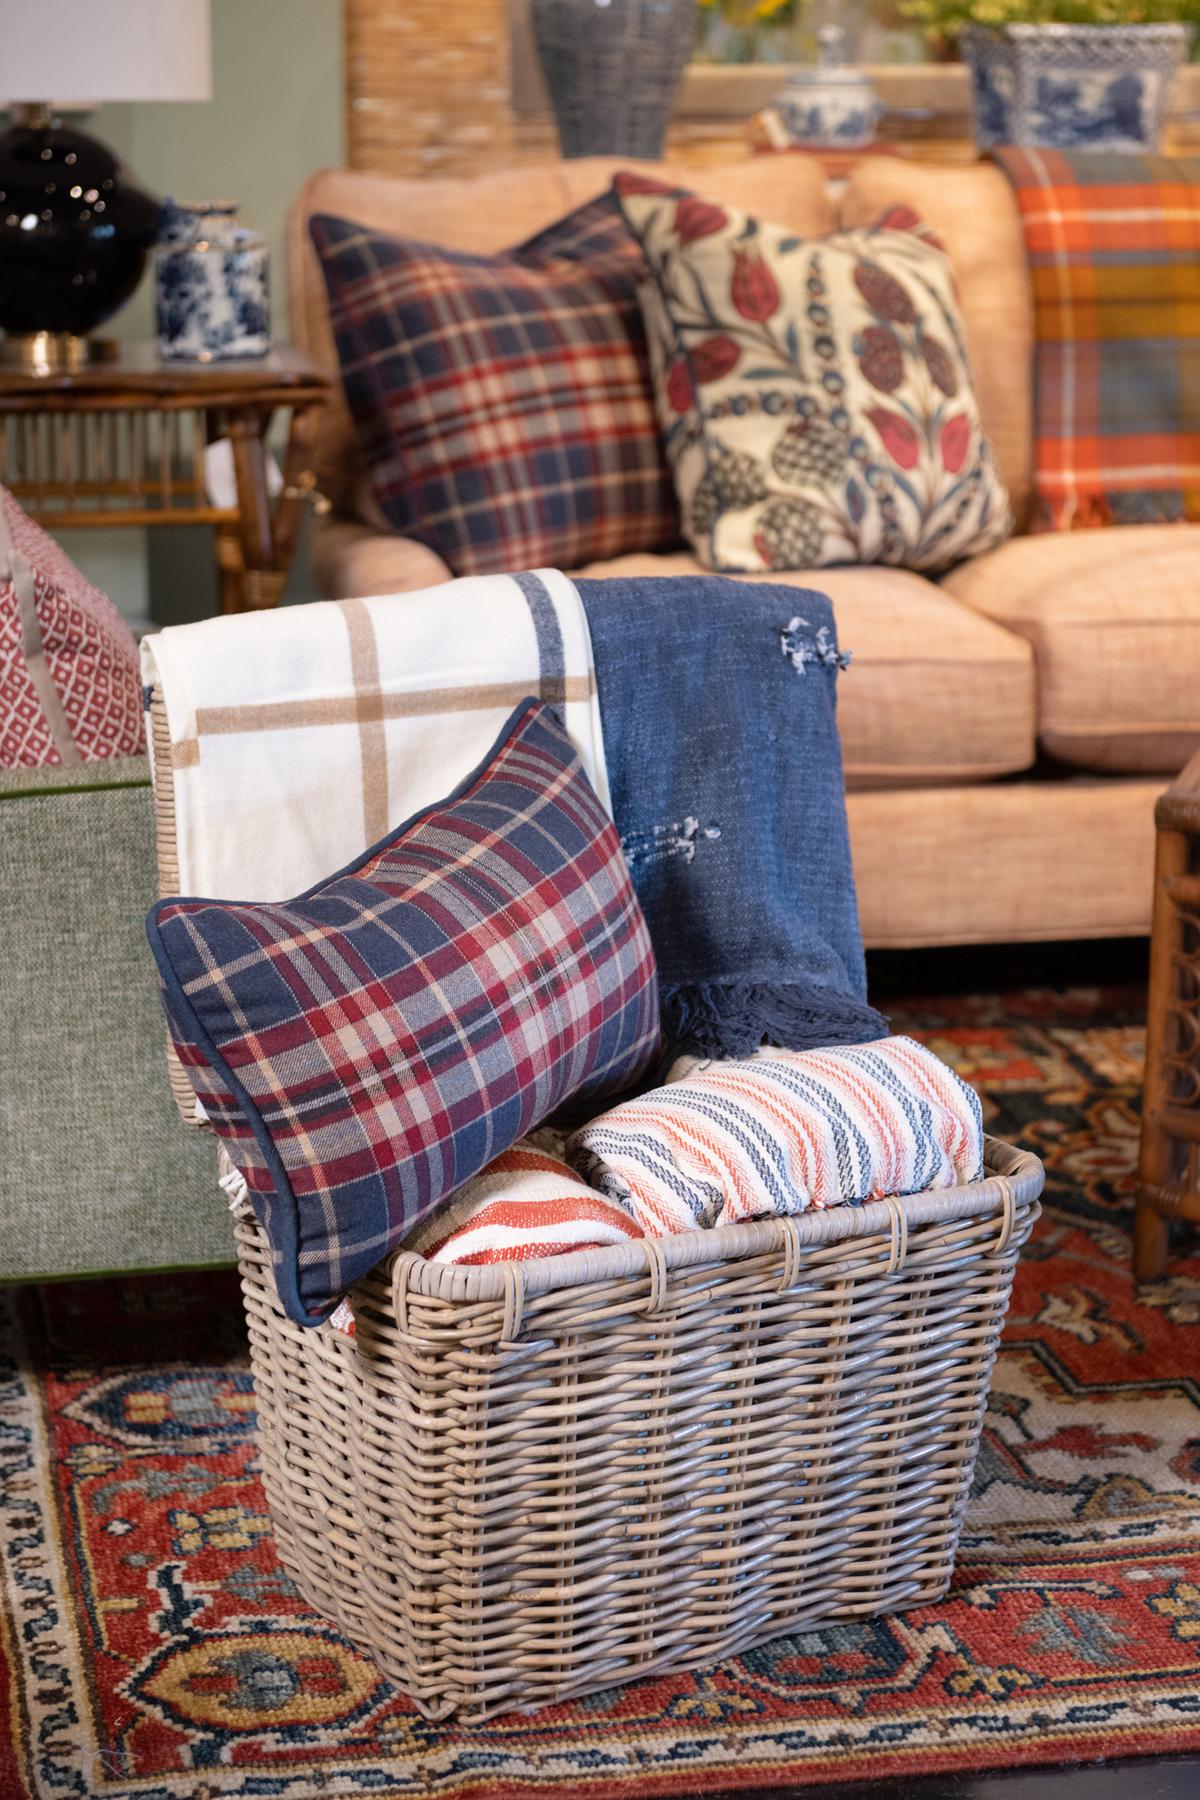 Store extra pillows and blankets in decorative baskets when not in use for an unexpected design element. (Handout/TNS)